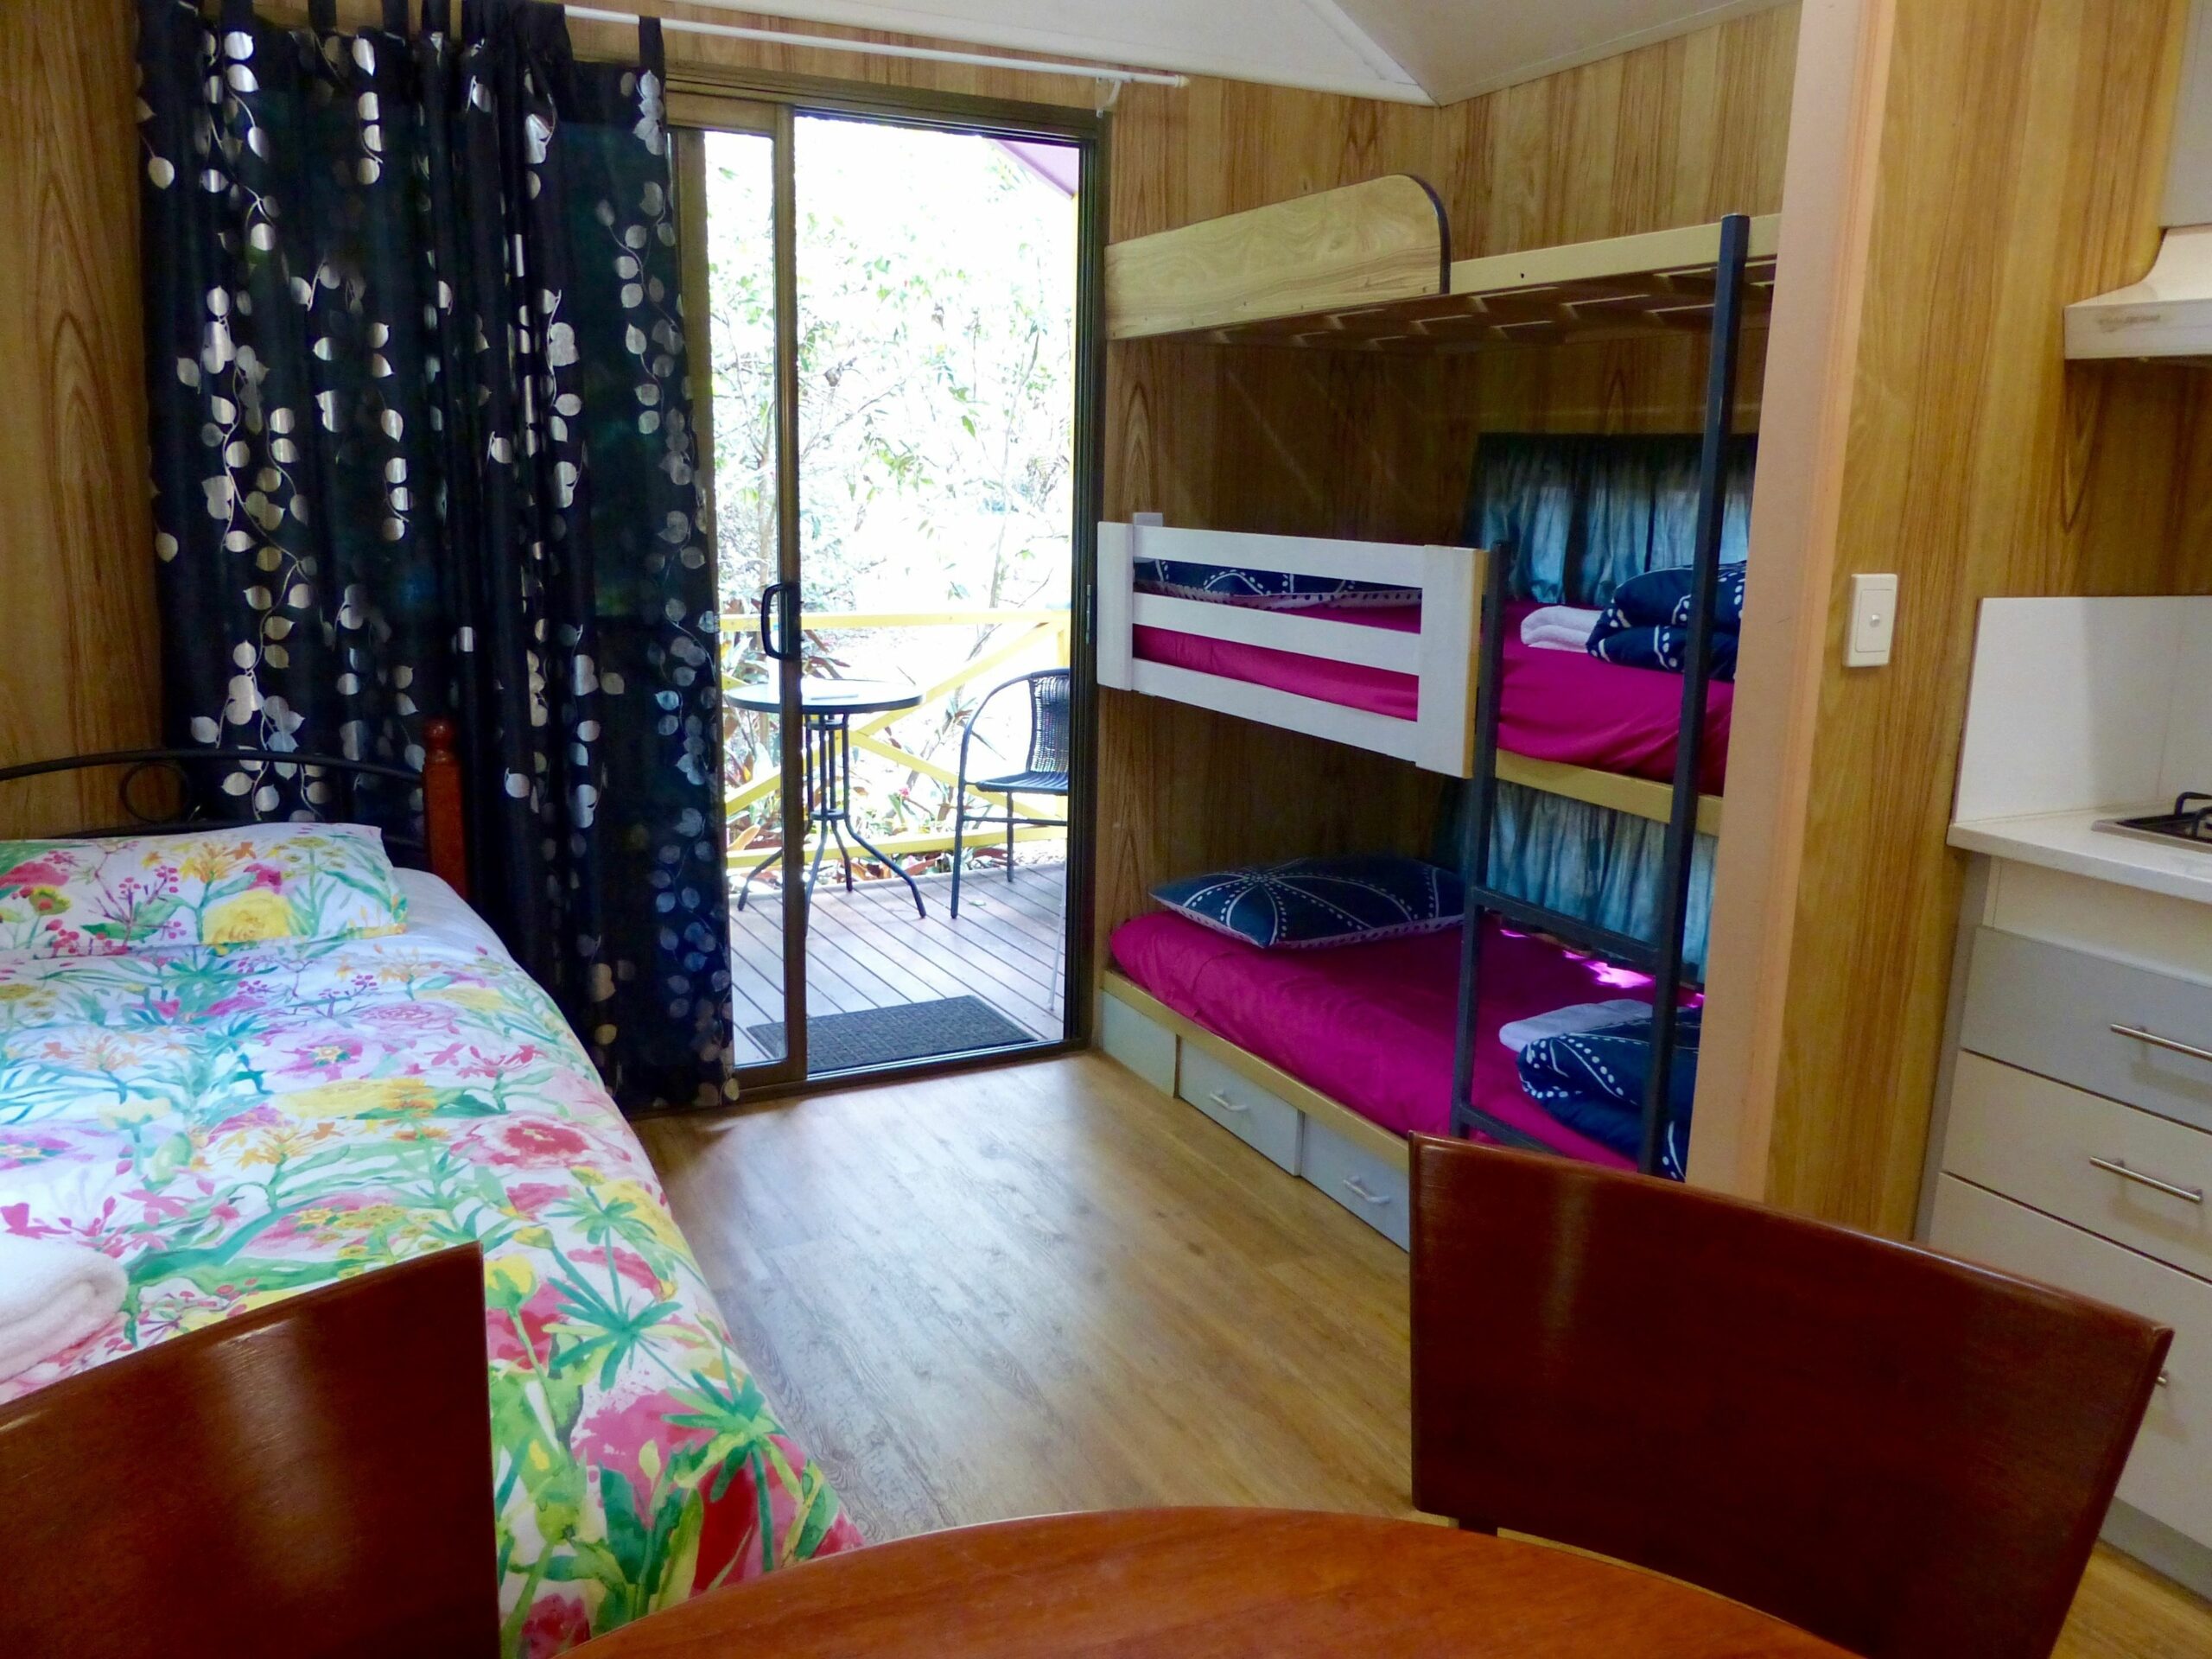 Lake Eacham Tourist Park & Self Contained Cabins